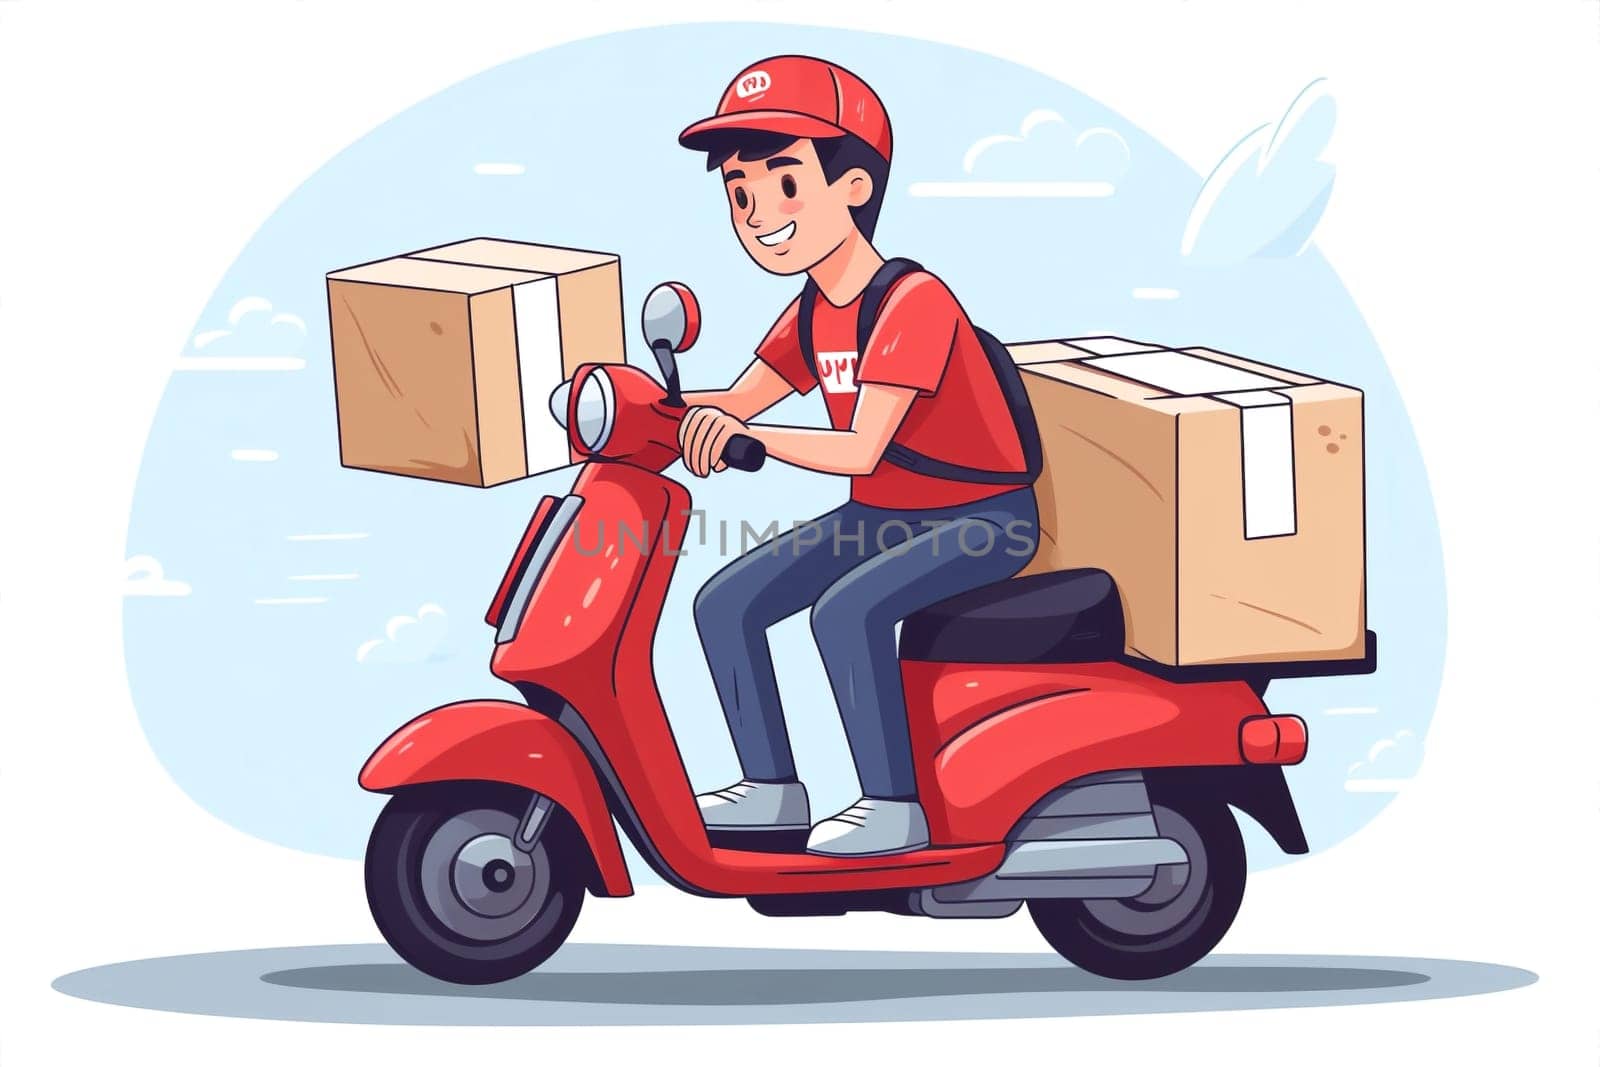 Man scooter motorcycle courier delivery package fast online business box speed car service by Vichizh